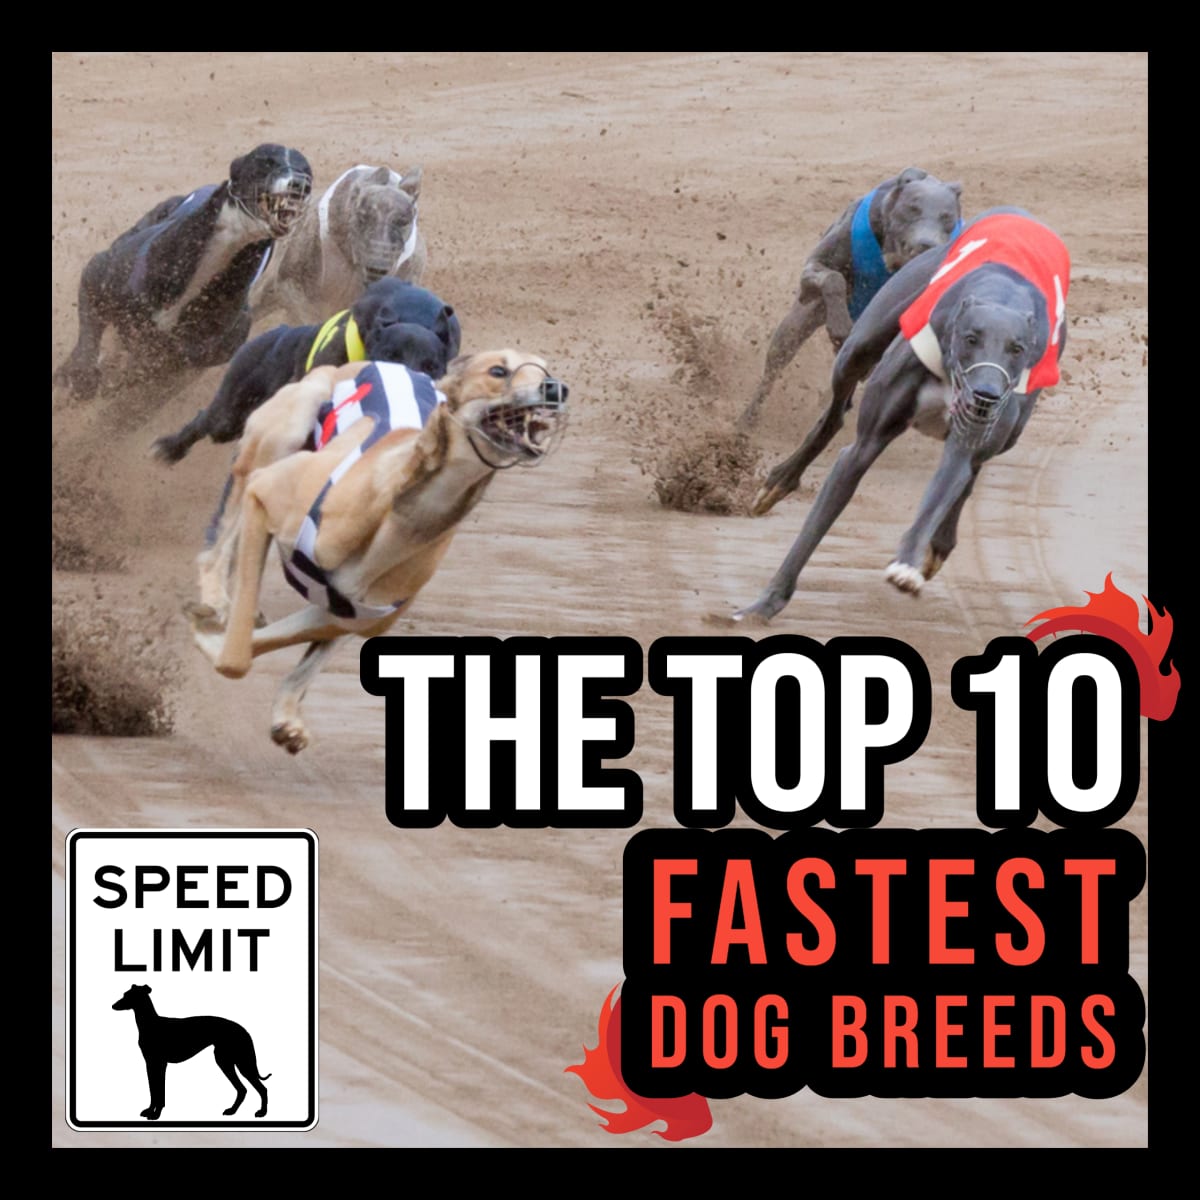 Are Greyhounds The Fastest Dogs